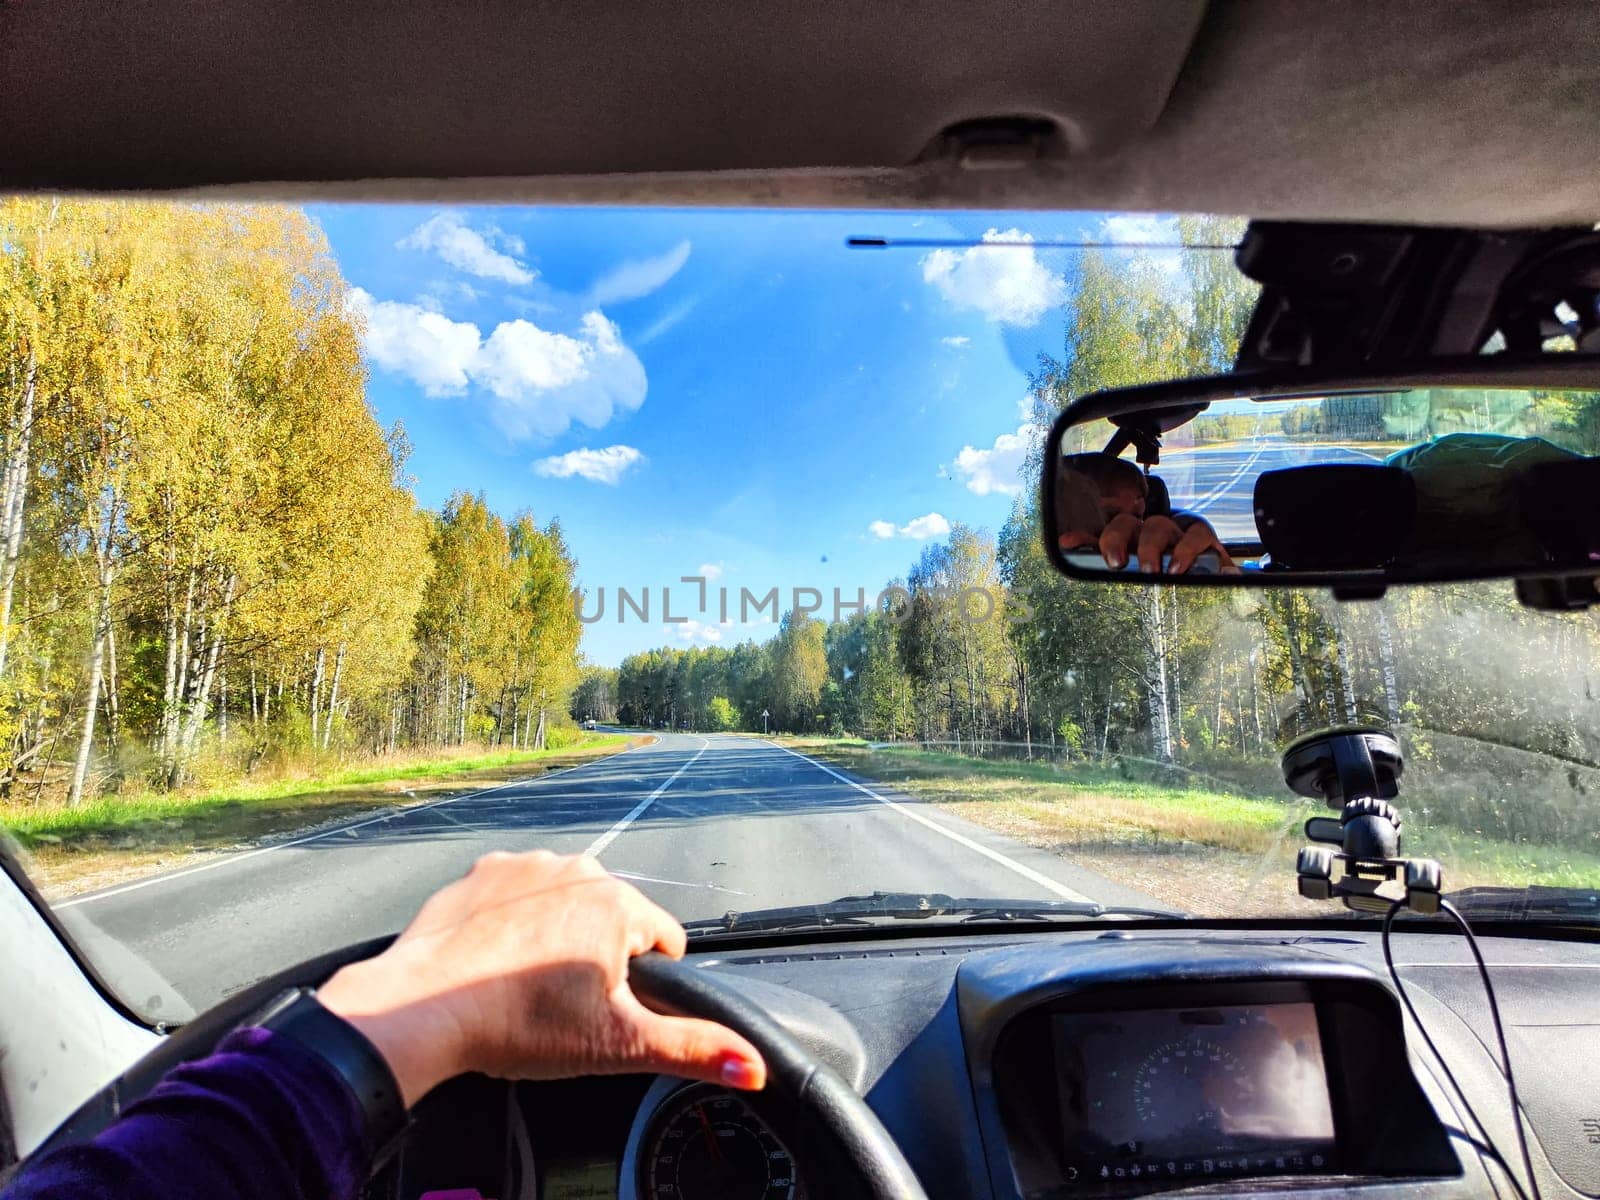 view from a car windshield of natural landscape with road, green trees and blue sky in summer or spring time. Hand of woman on steering wheel. Female traveler driving alone on trip or journey